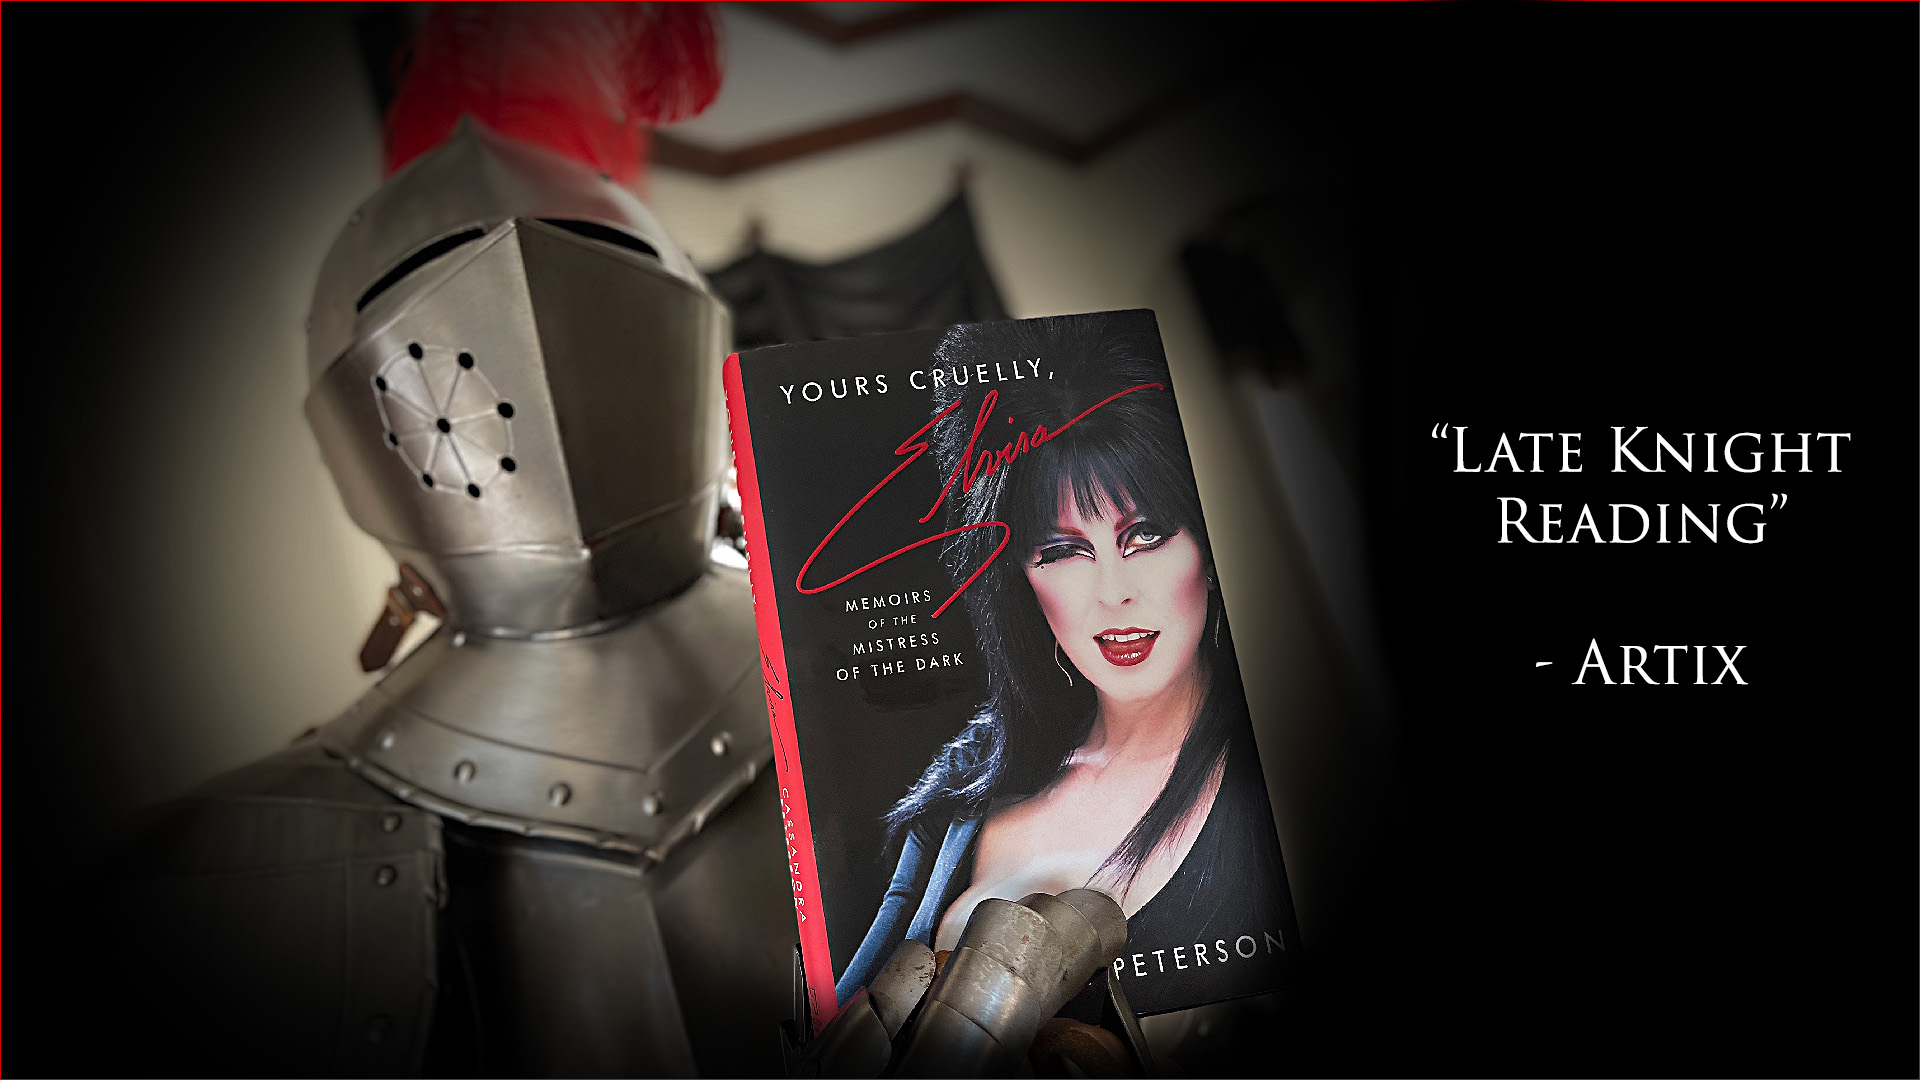 Elvira's Book is some Late Knight Reading